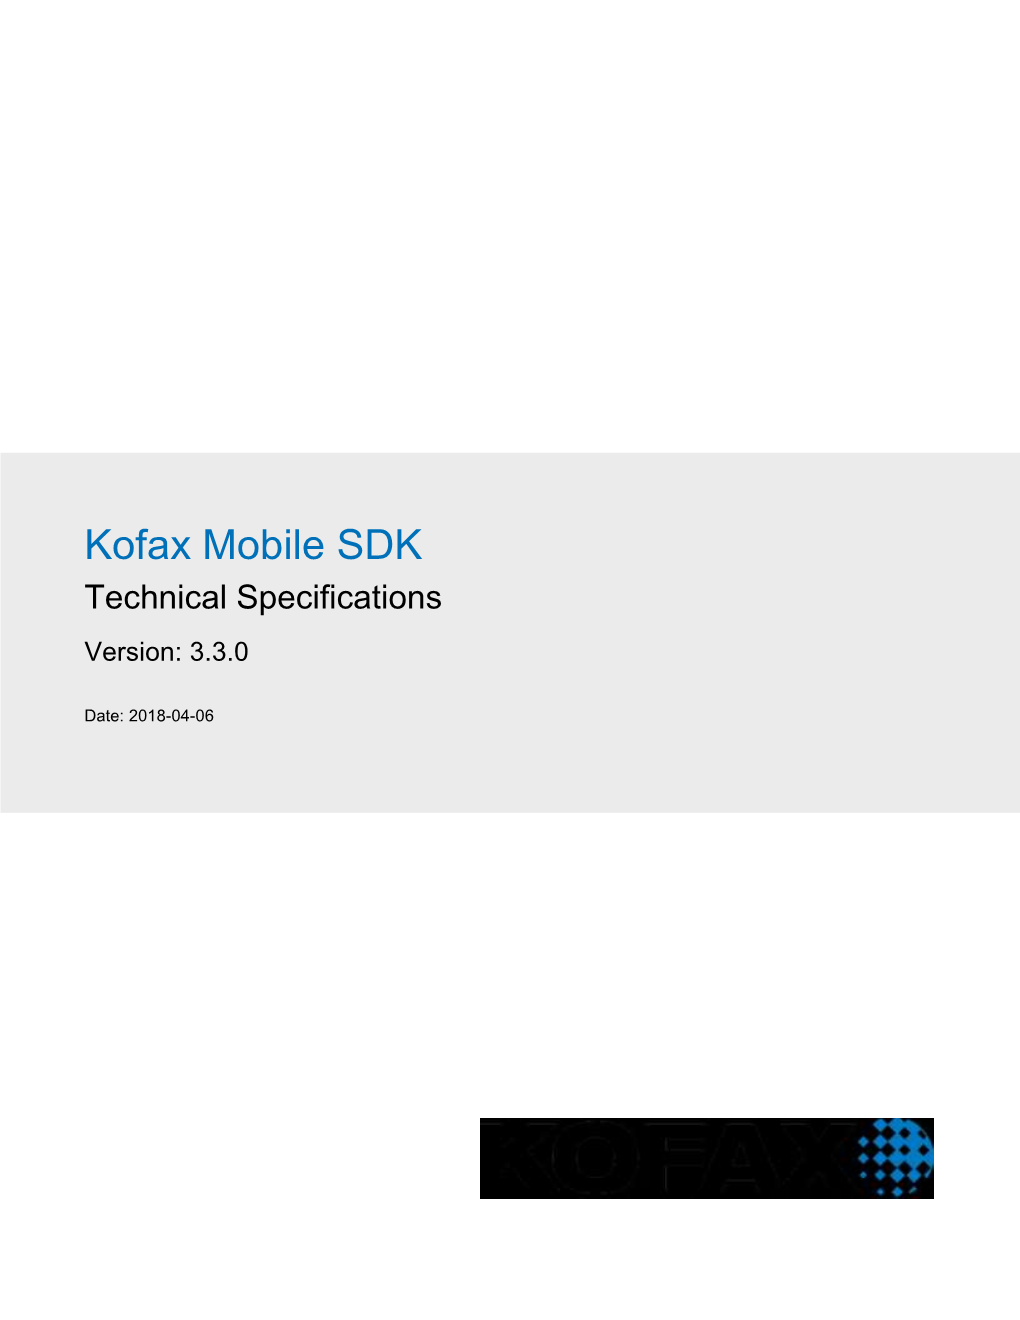 Kofax Mobile SDK 3.3 Technical Specifications